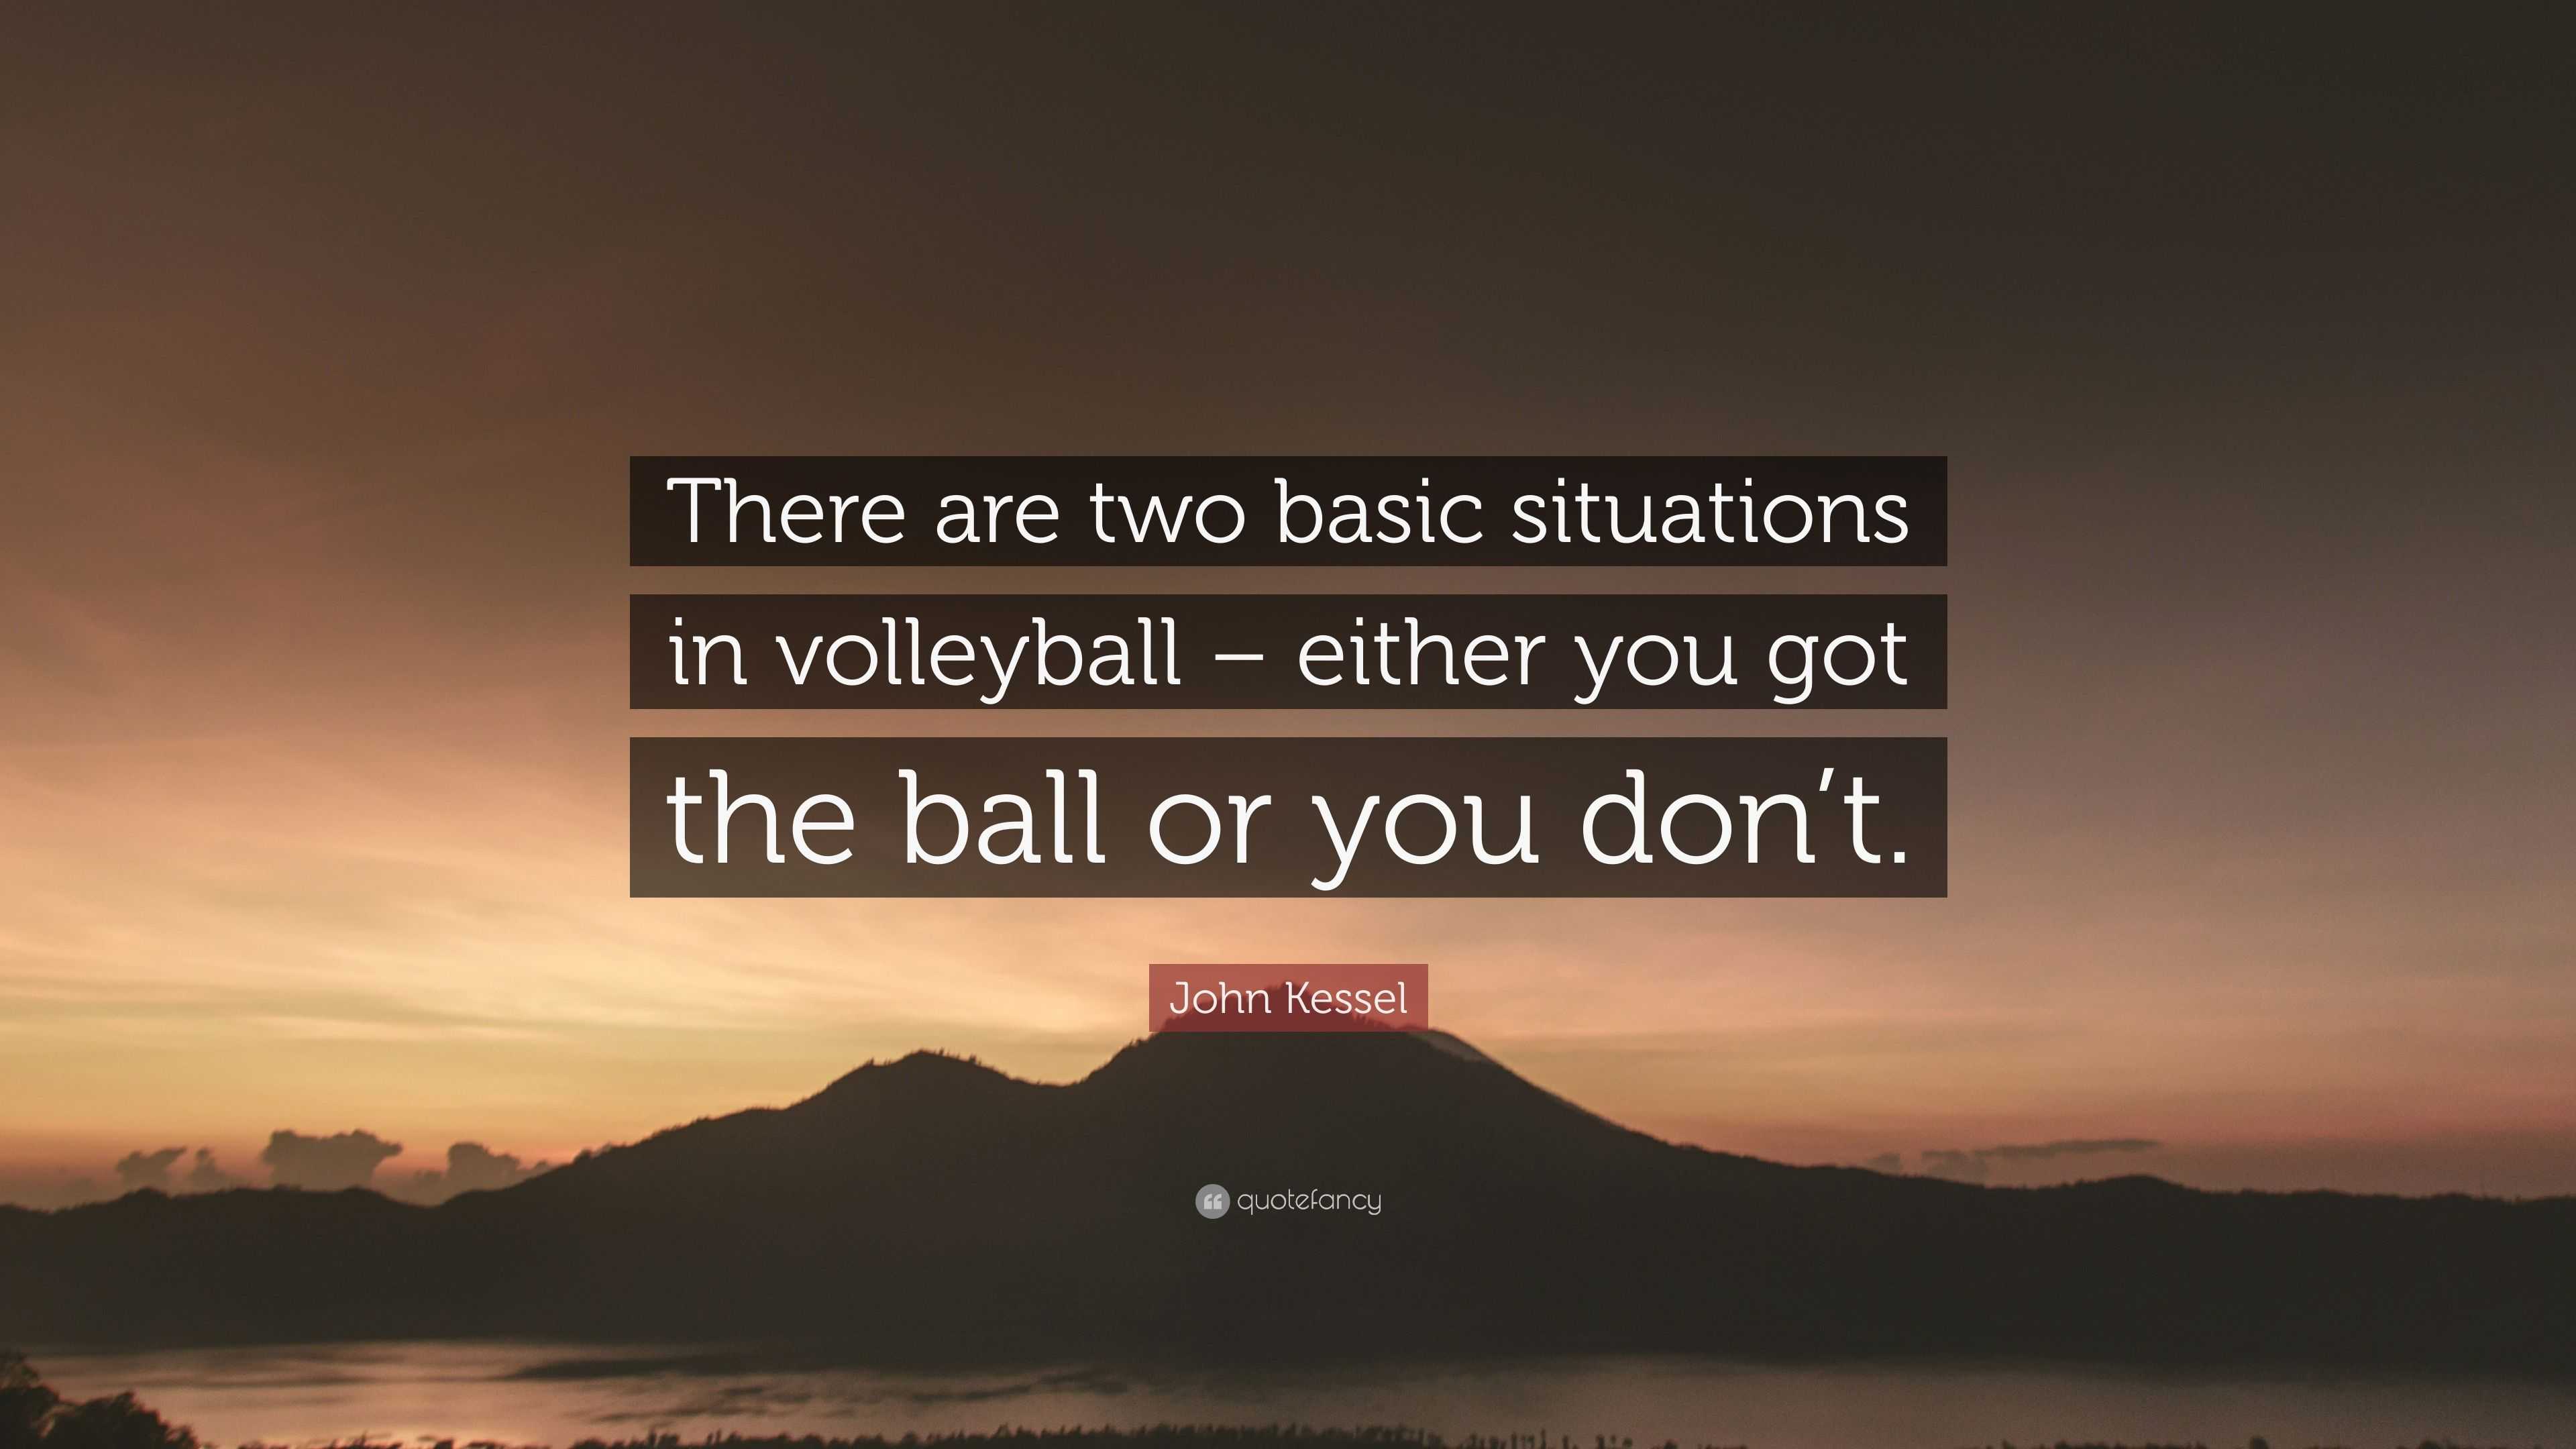 John Kessel Quote: “There are two basic situations in volleyball ...